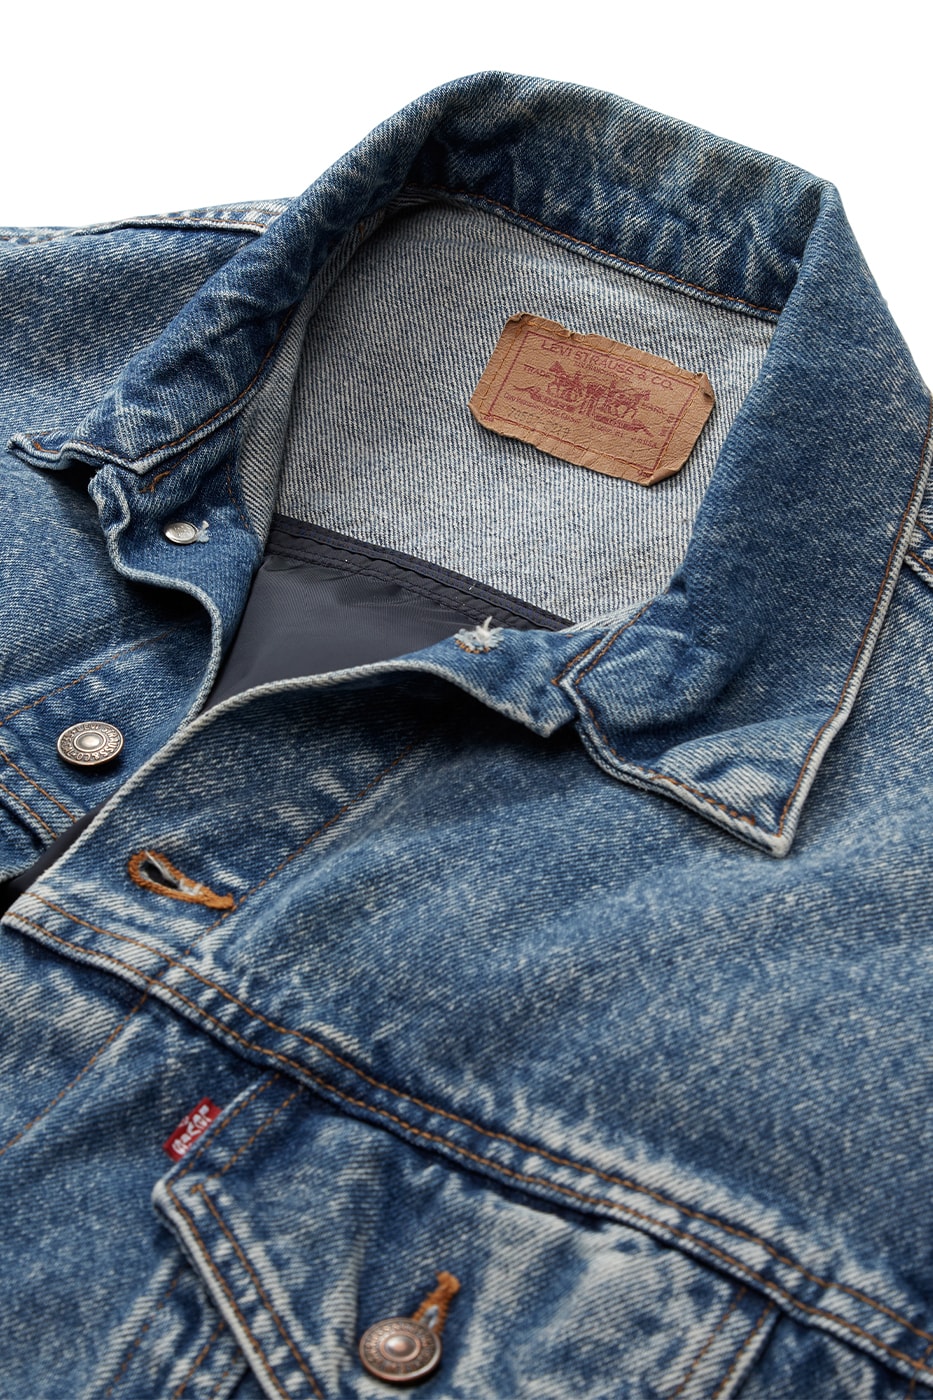 Undercover levis 2022 fall season november 11 american japanese hybrid trucker jeans cable knit indigo cargo we make noise not clothes black release info date price